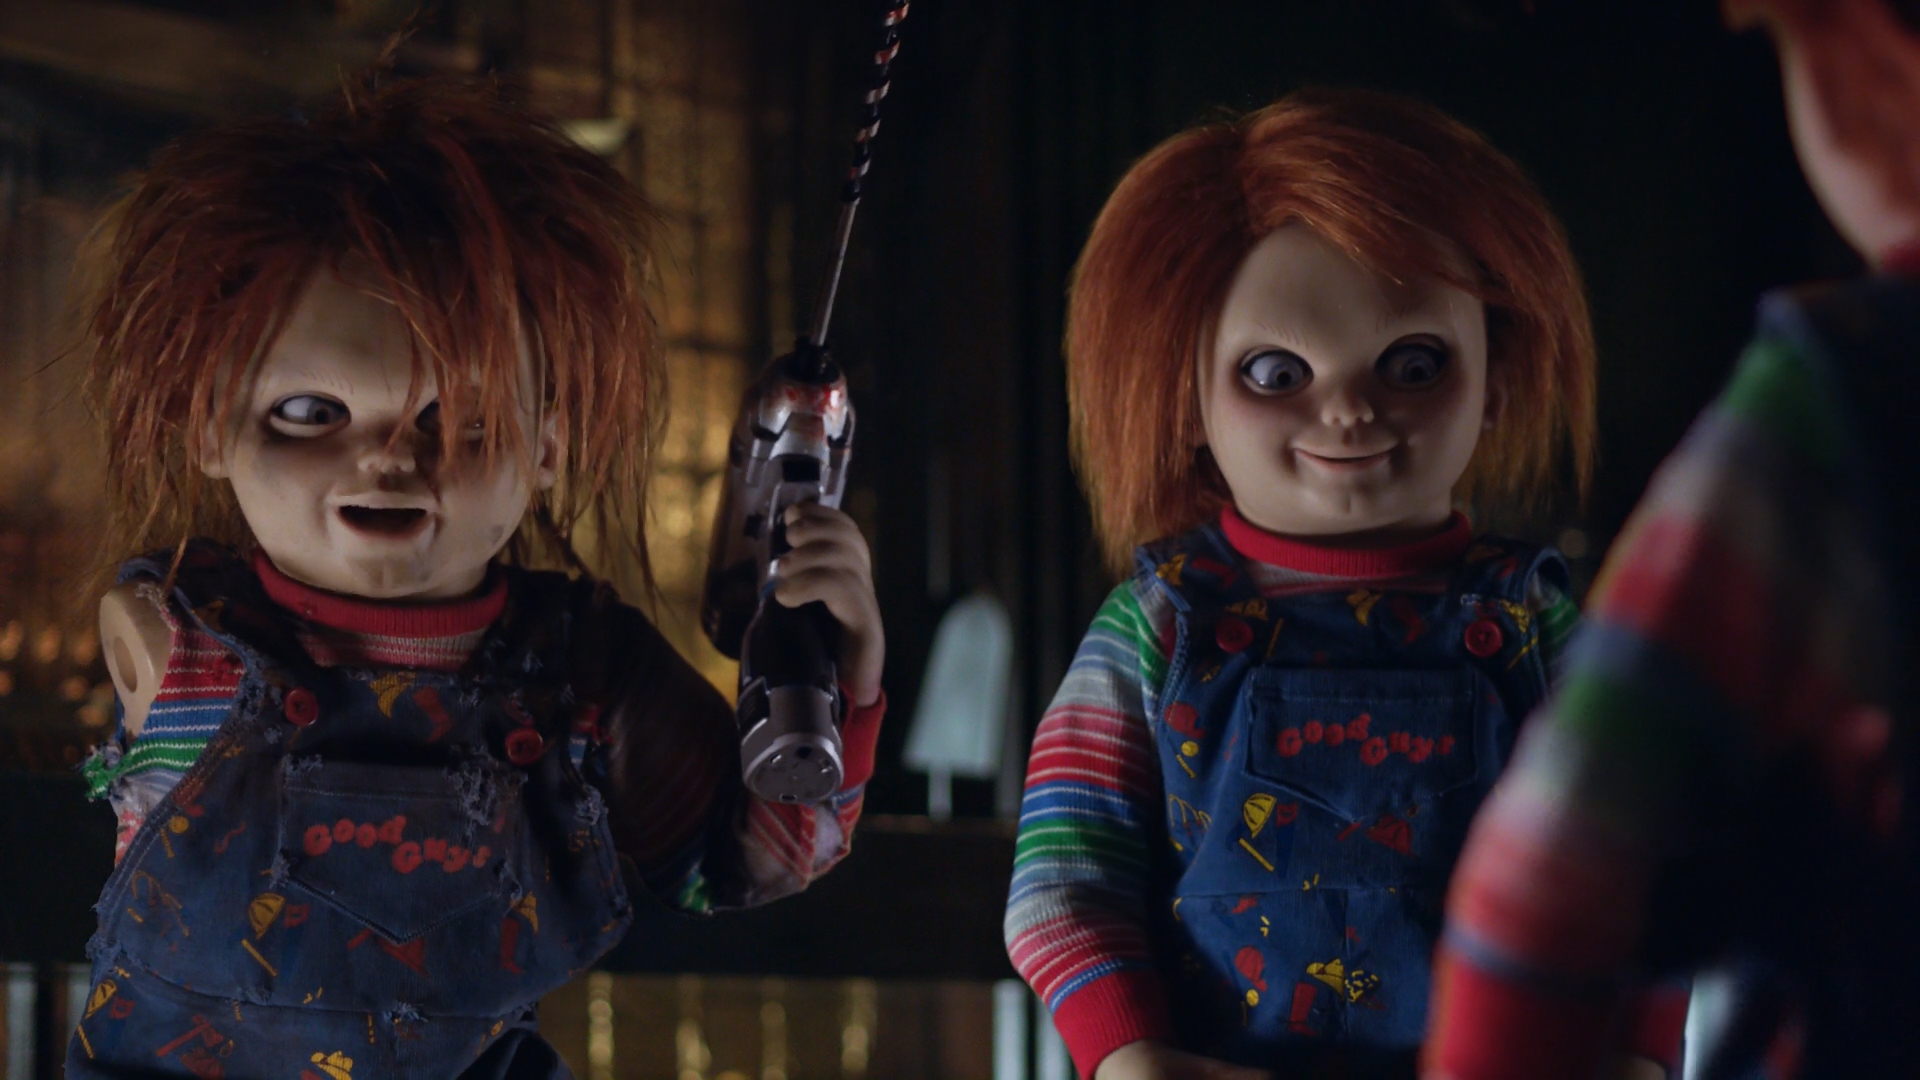 Cult of Chucky Review (2017 Child's Play Sequel)